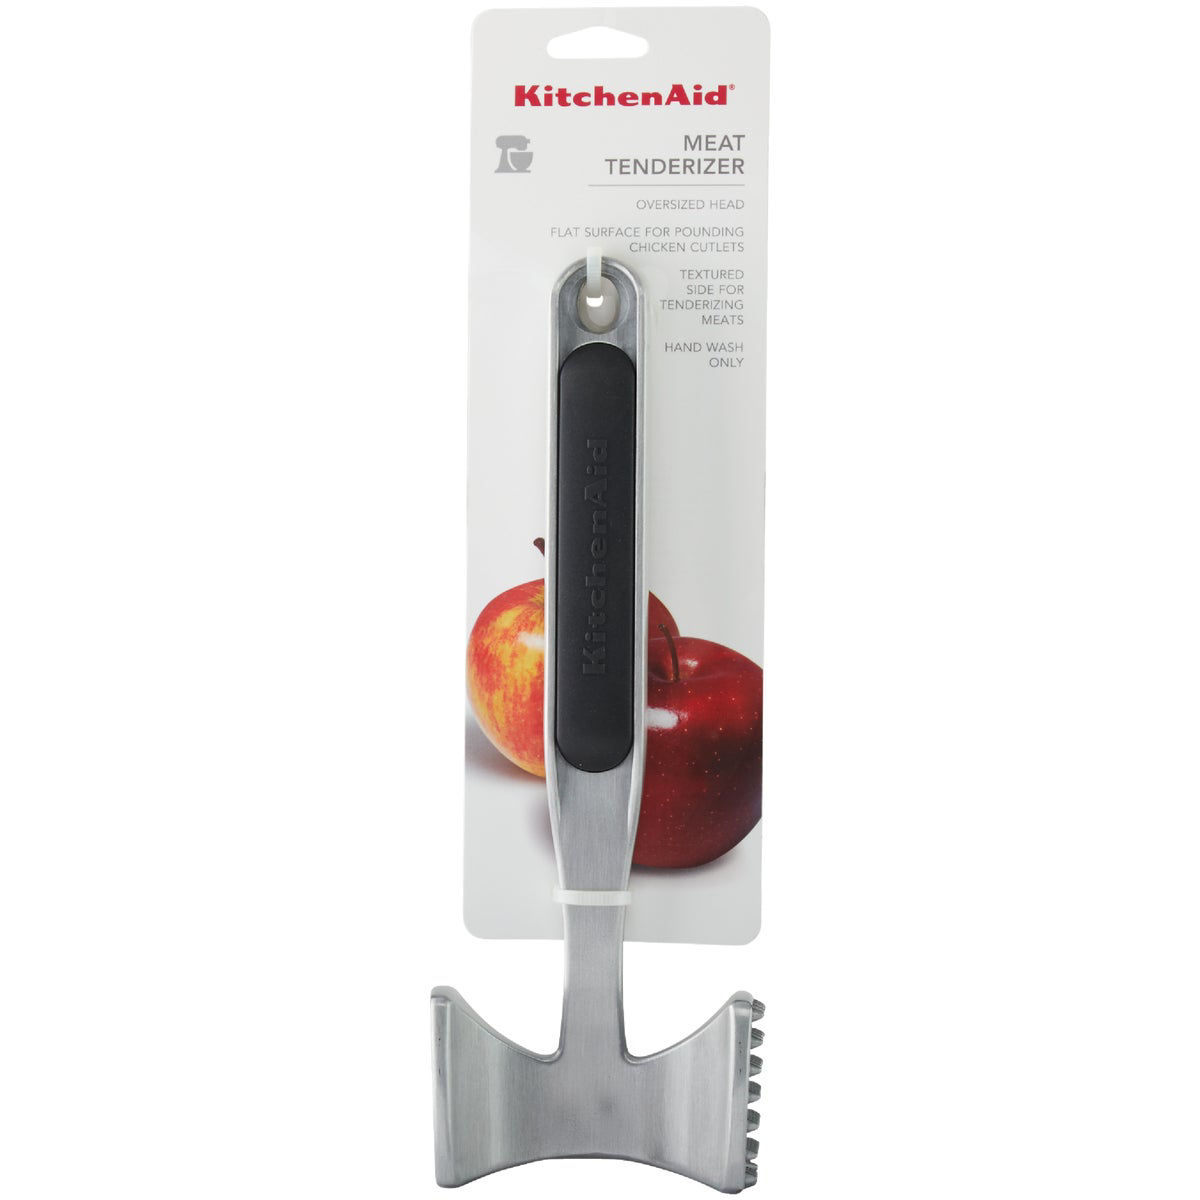 1 KitchenAid Meat Tenderizer Oversized Head Flat Surface For Chicken  Textured